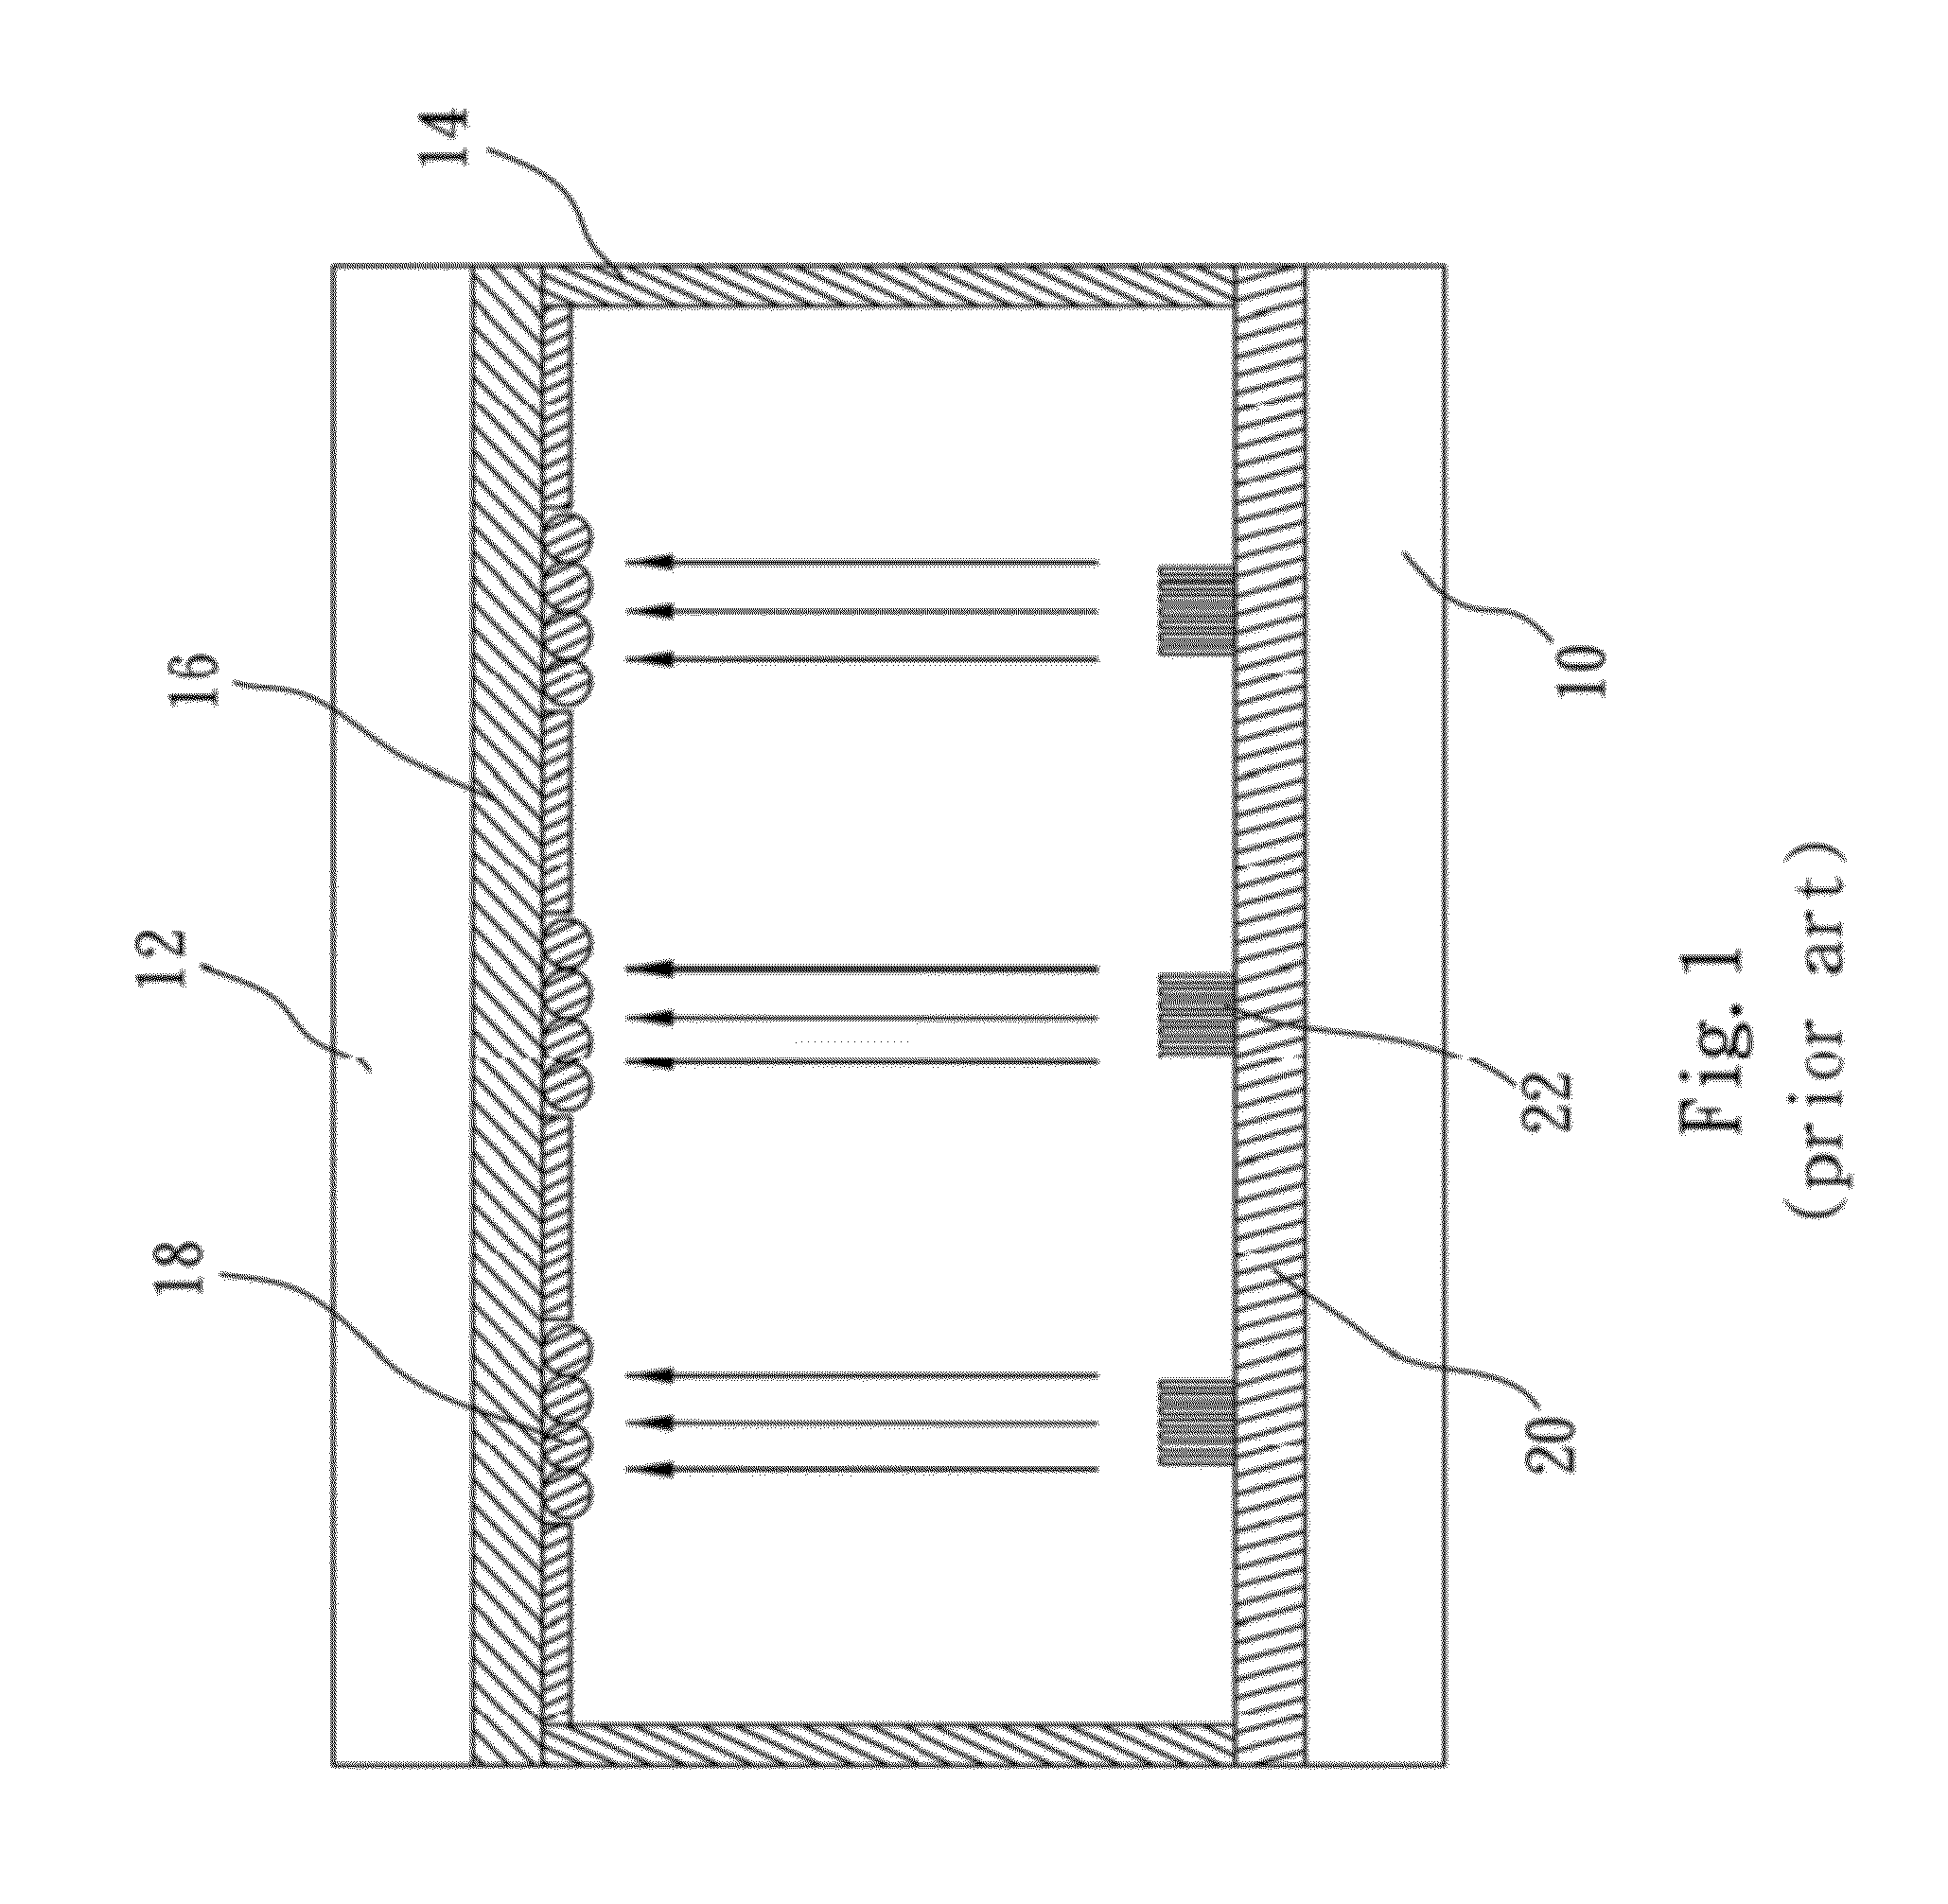 Double-sided light emitting field emission device and method of manufacturing the same